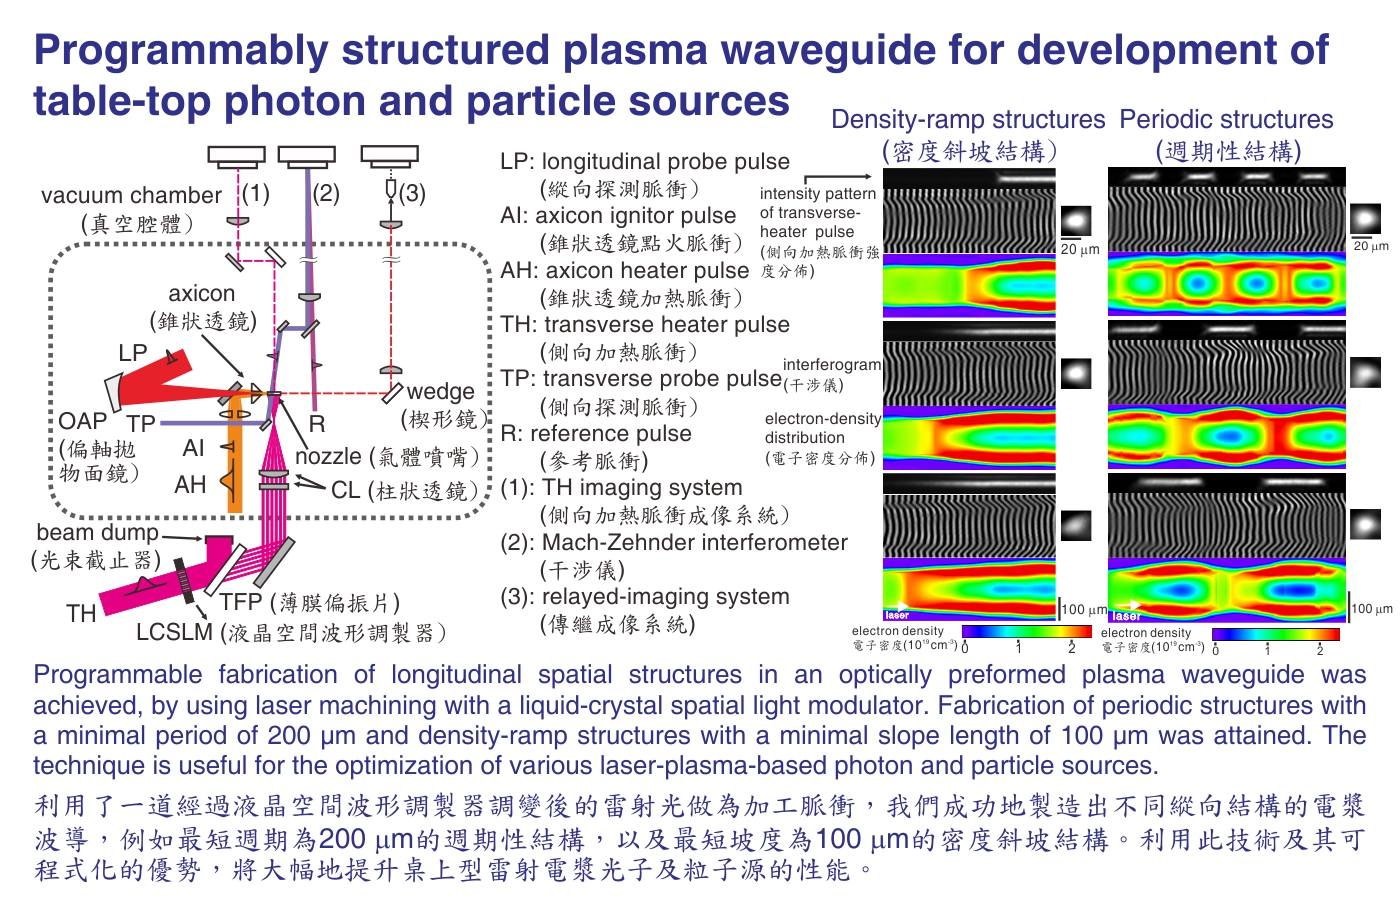 Programmably structured plasma waveguide for development of table-top photon and particle sources